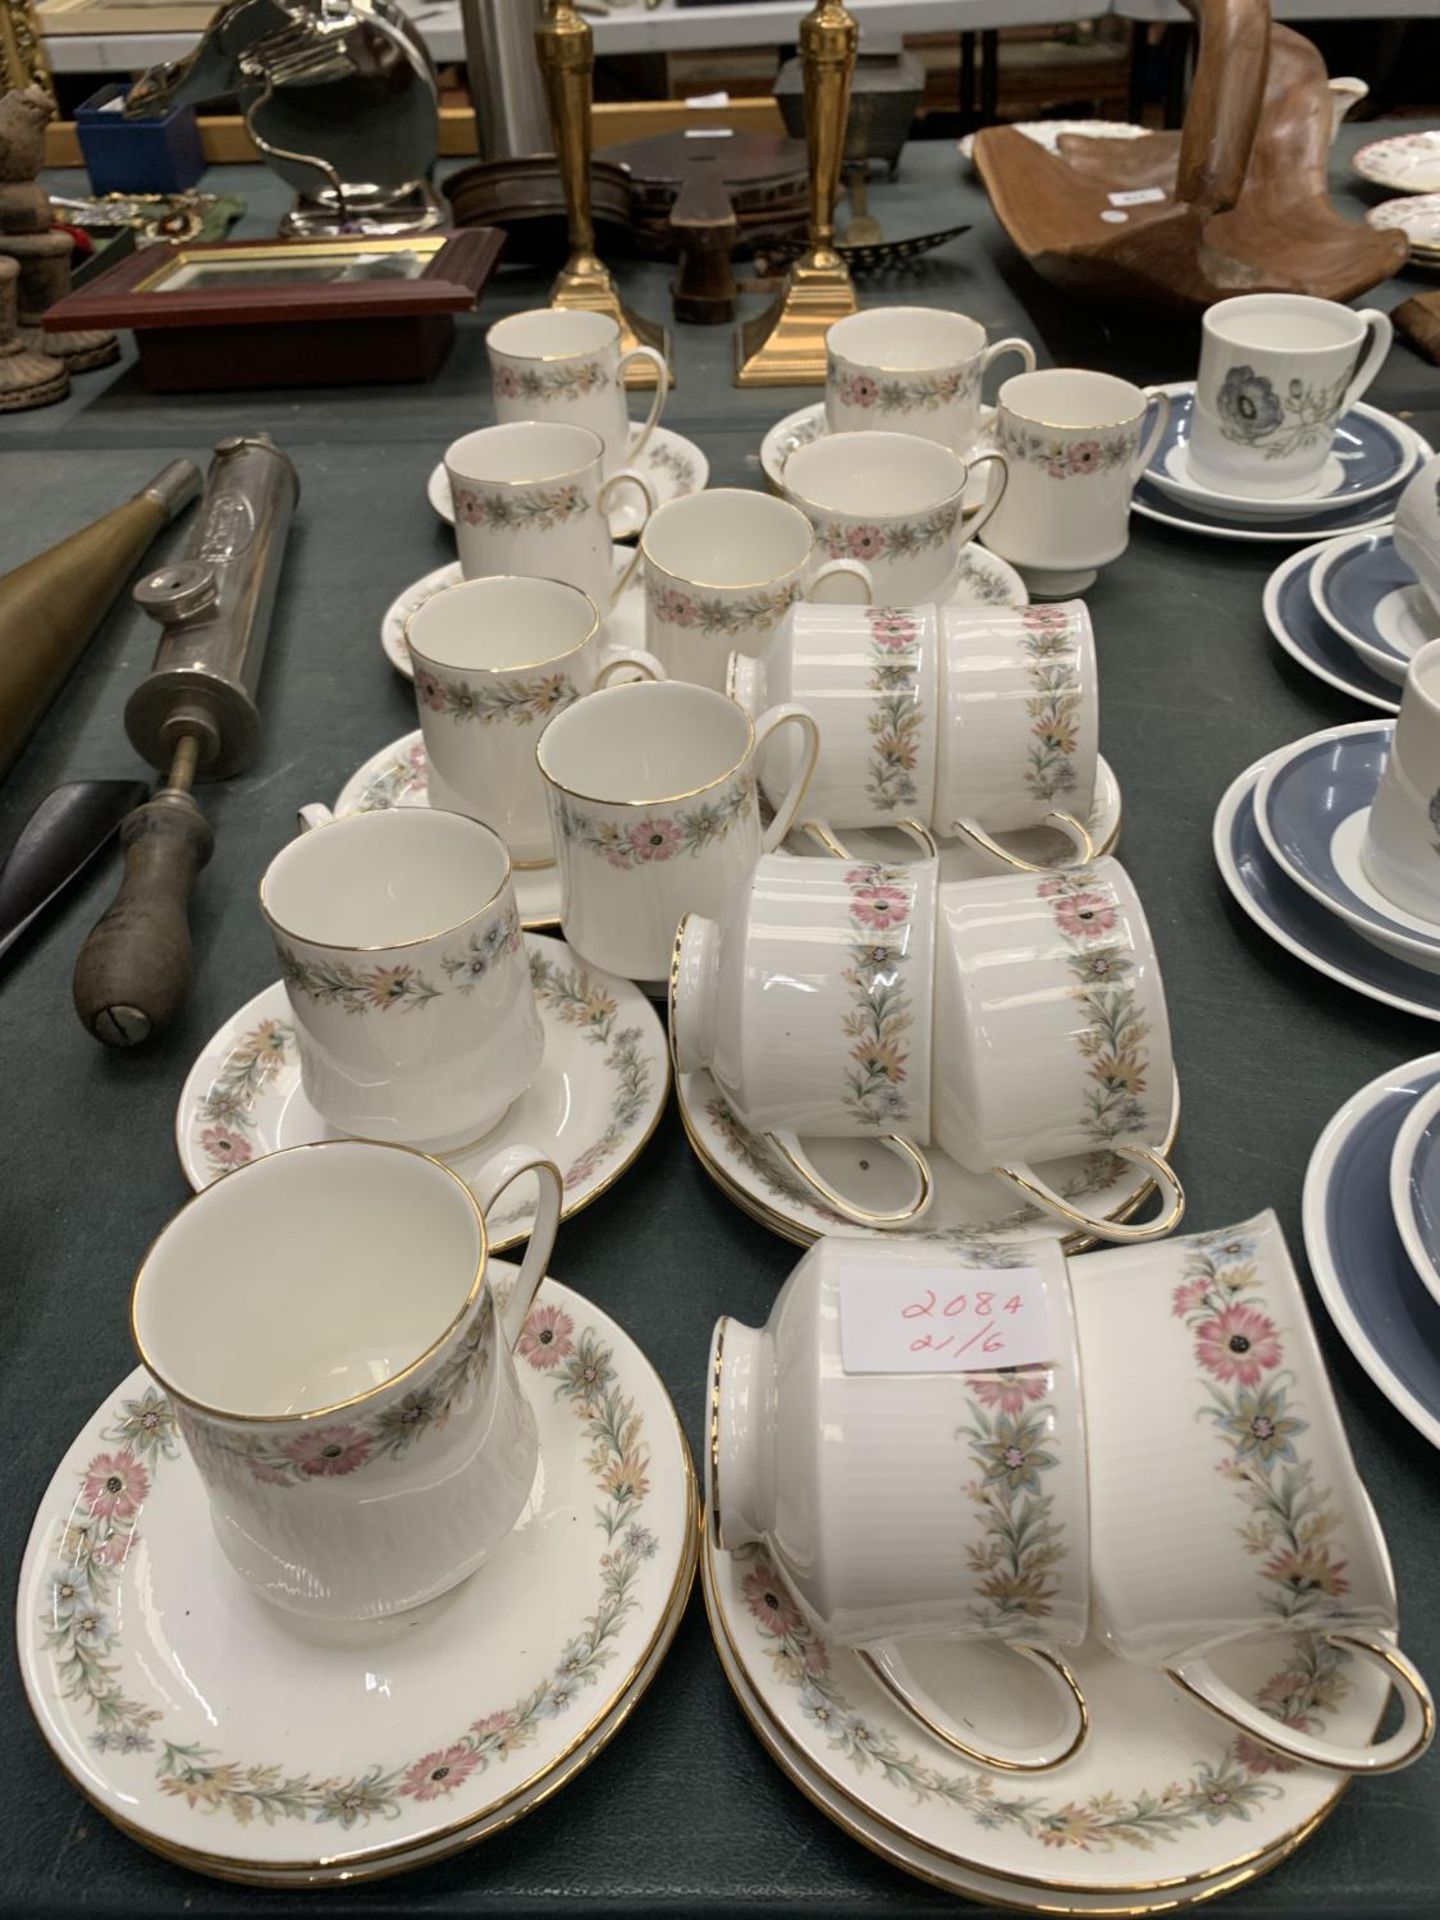 A LARGE QUANTITY OF ROYAL ALBERT 'BELINDA' CUPS AND SAUCERS - Image 2 of 3